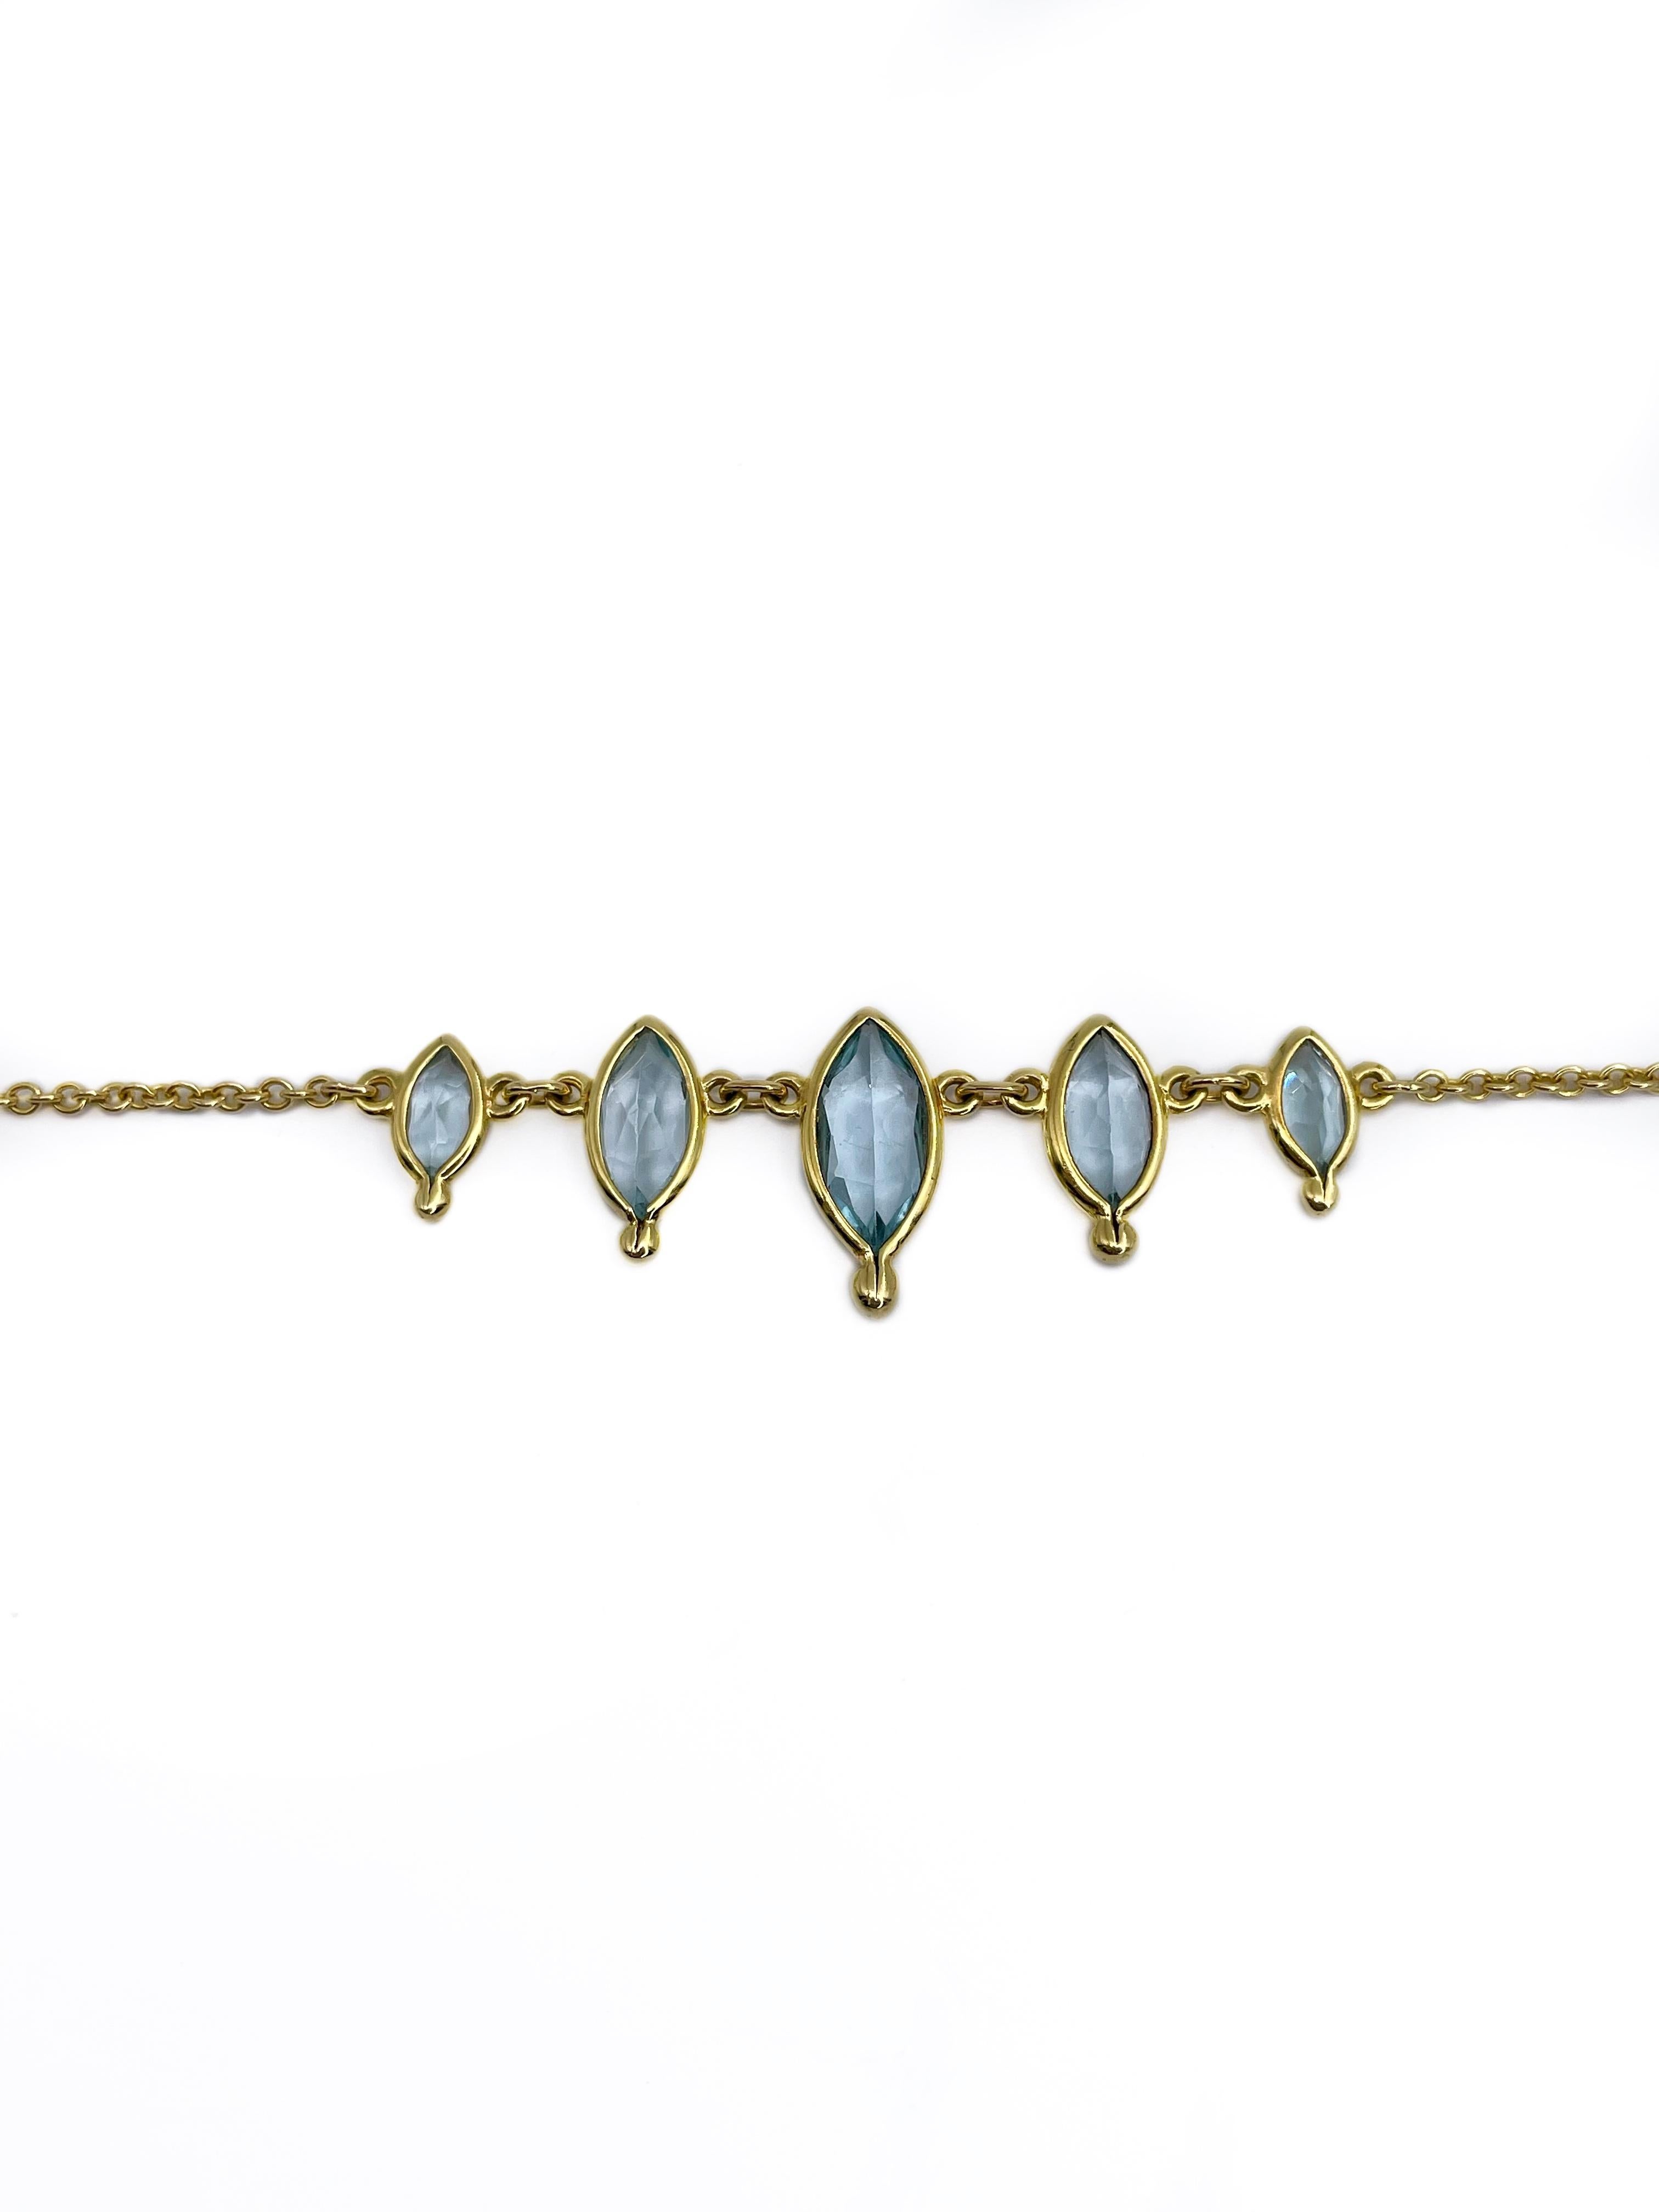 This is an elegant vintage collier necklace crafted in 18K yellow gold. It features 7 marquise cut blue topazes: TW 3.76ct, B 2/2, VVS-VS. 

Weight: 5.02g
Length: 42cm

———

If you have any questions, please feel free to ask. We describe our items